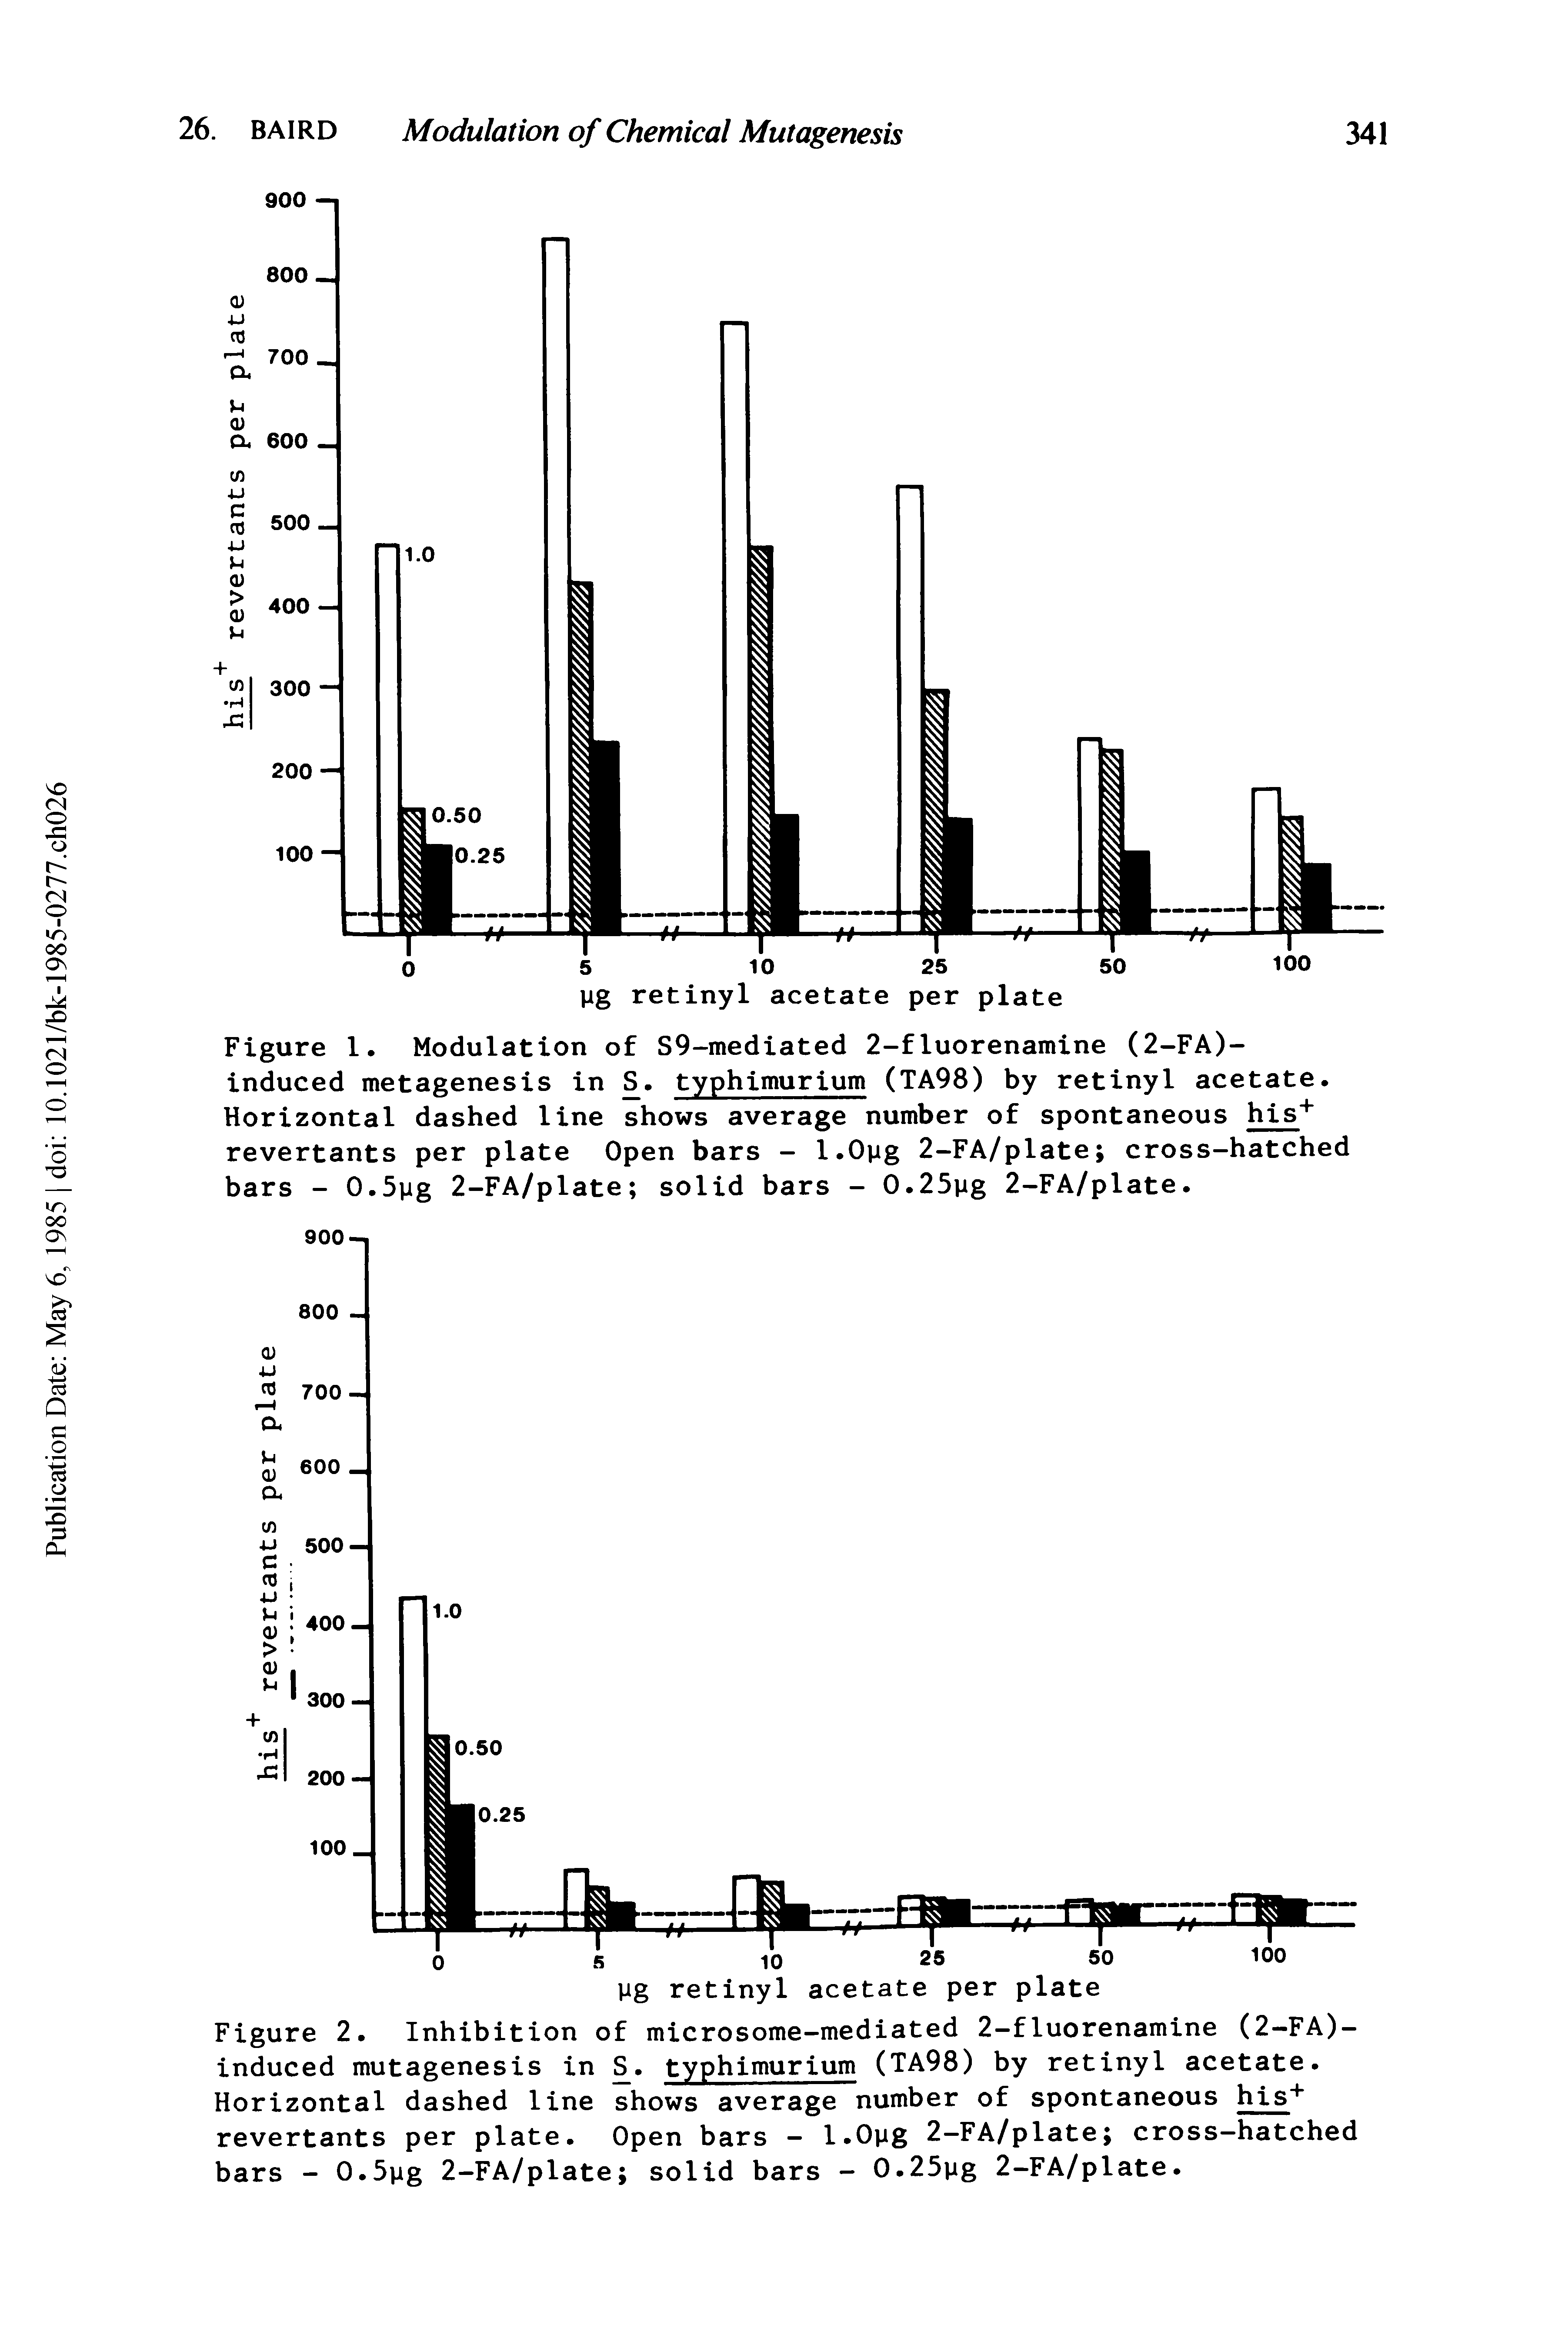 Figure 2. Inhibition of microsome-mediated 2-fluorenamine (2-FA)-induced mutagenesis in S. typhimurium (TA98) by retinyl acetate. Horizontal dashed line shows average number of spontaneous his+ revertants per plate. Open bars - l.Opg 2-FA/plate cross-hatched bars - 0.5Mg 2-FA/plate solid bars - 0.25pg 2-FA/plate.